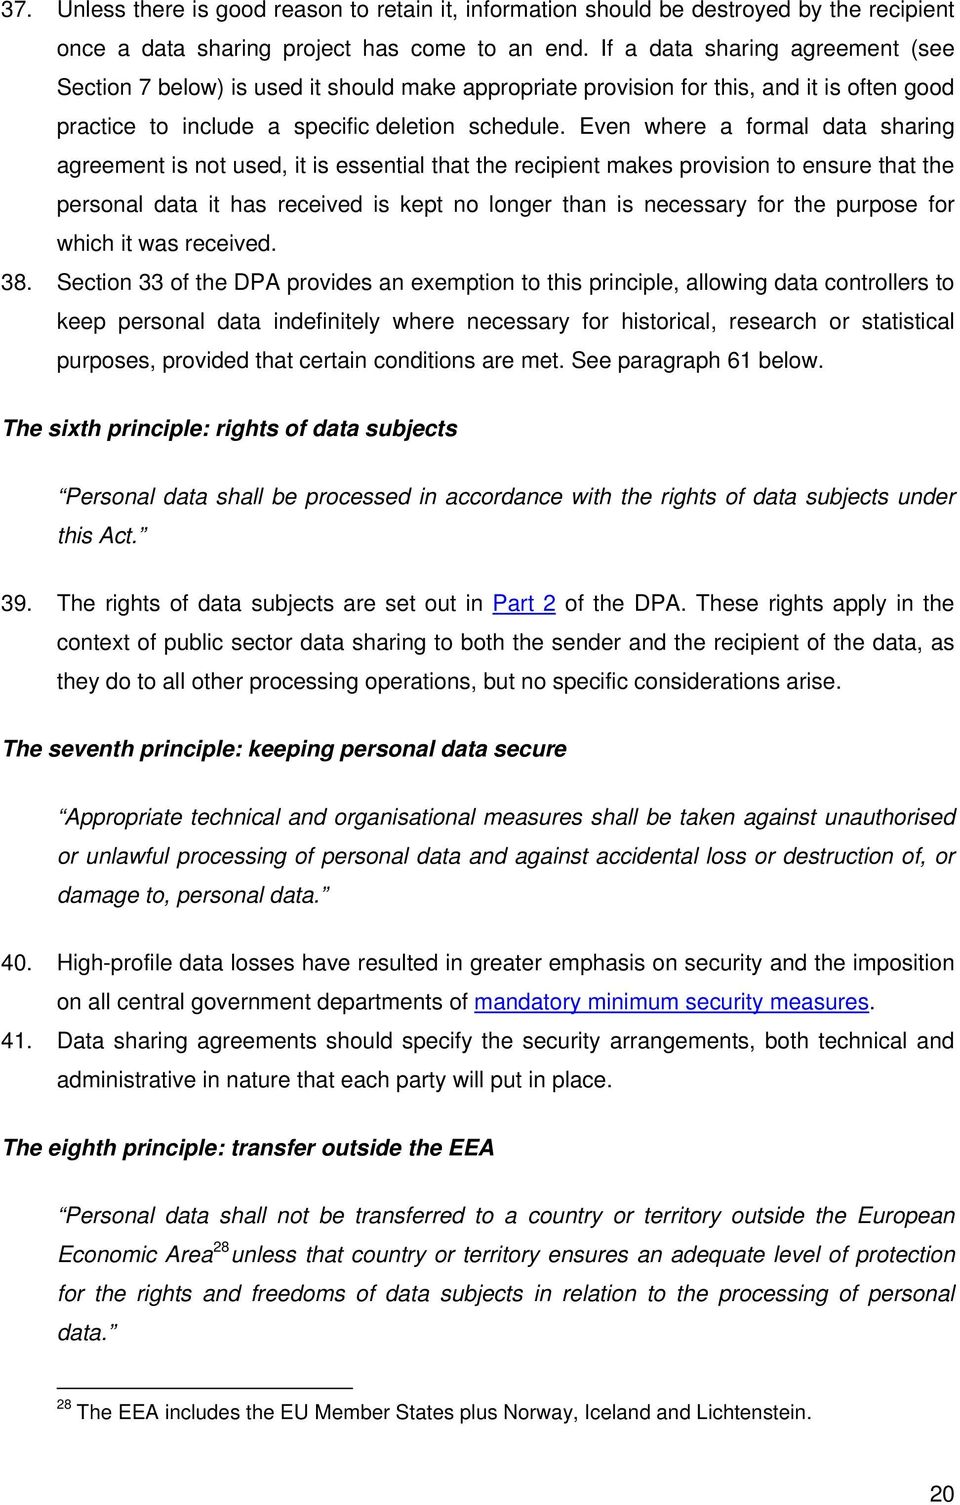 Even where a formal data sharing agreement is not used, it is essential that the recipient makes provision to ensure that the personal data it has received is kept no longer than is necessary for the